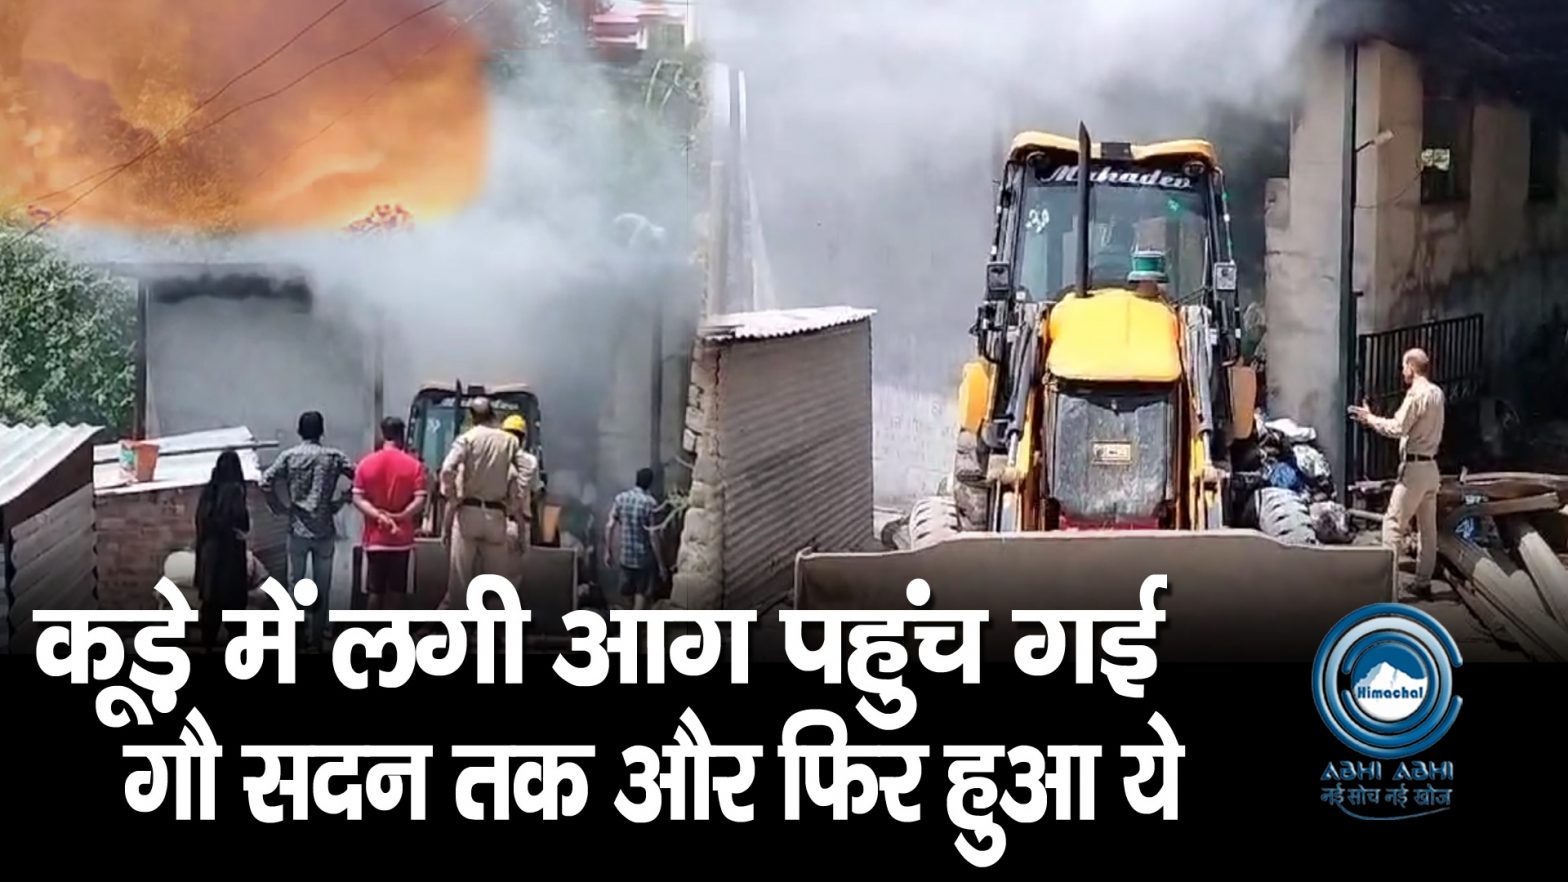 Bilaspur | Garbage fire | Cow House |